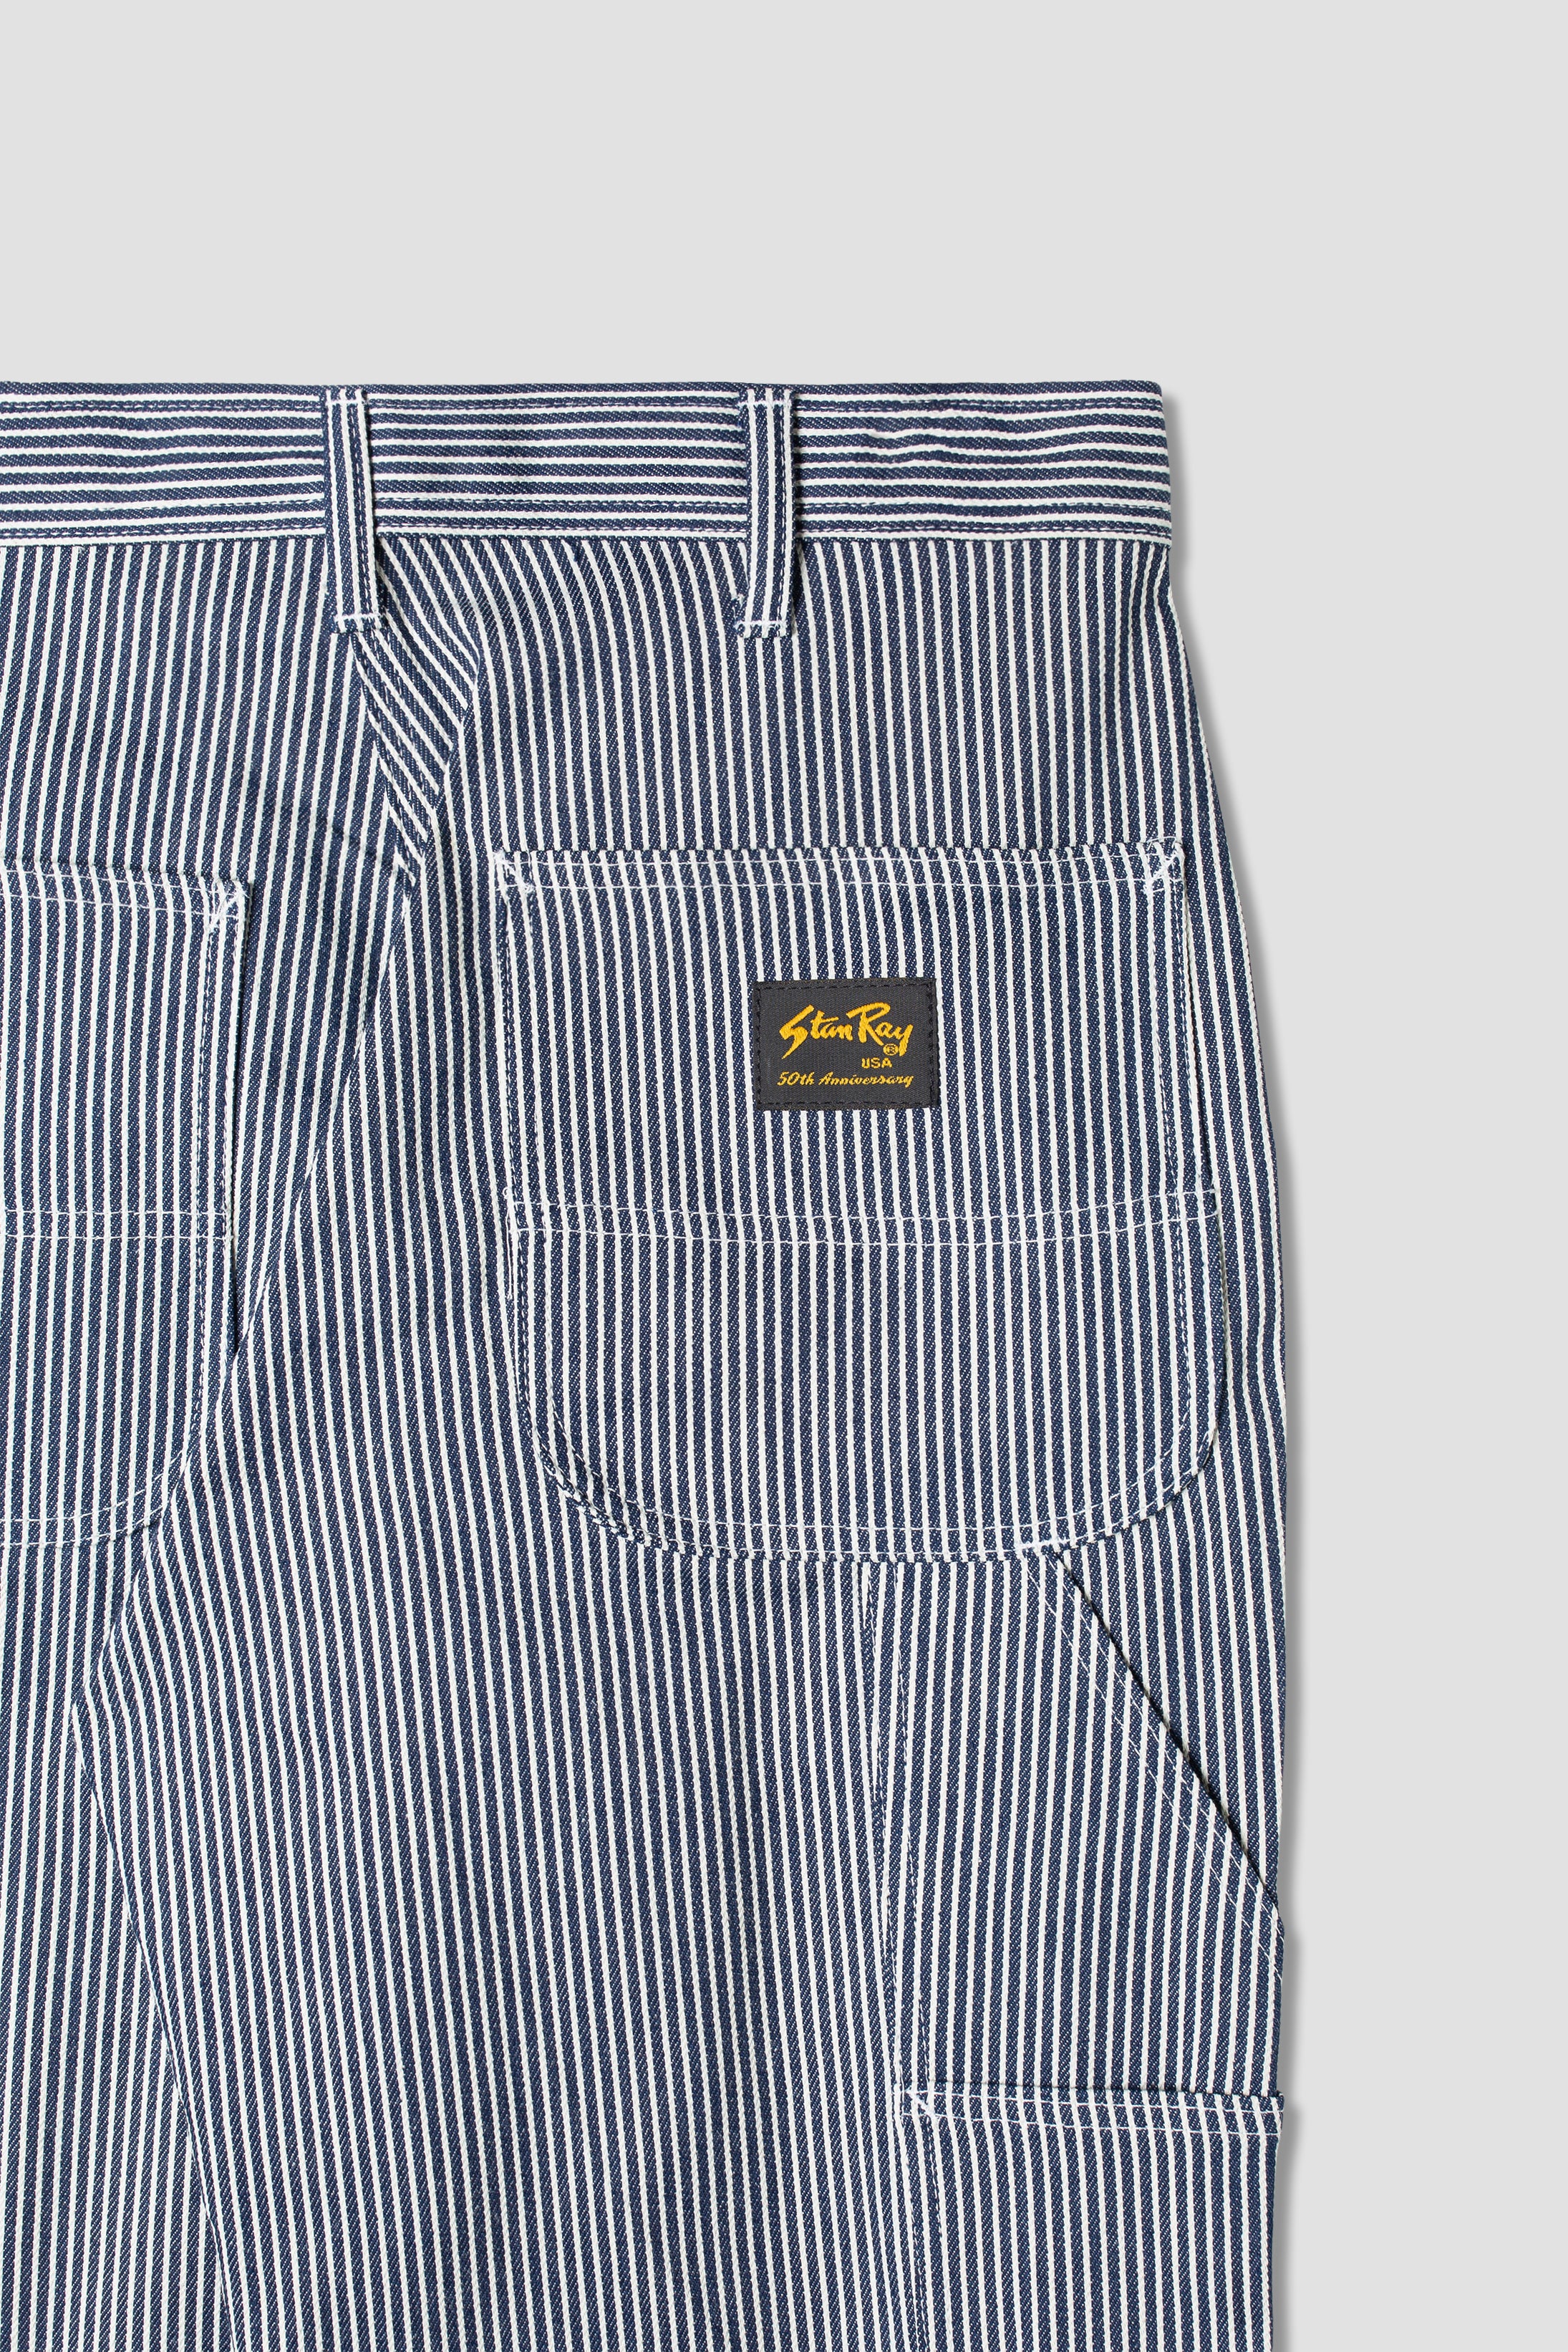 80s Painter Pant (Hickory Stripe) – Stan Ray